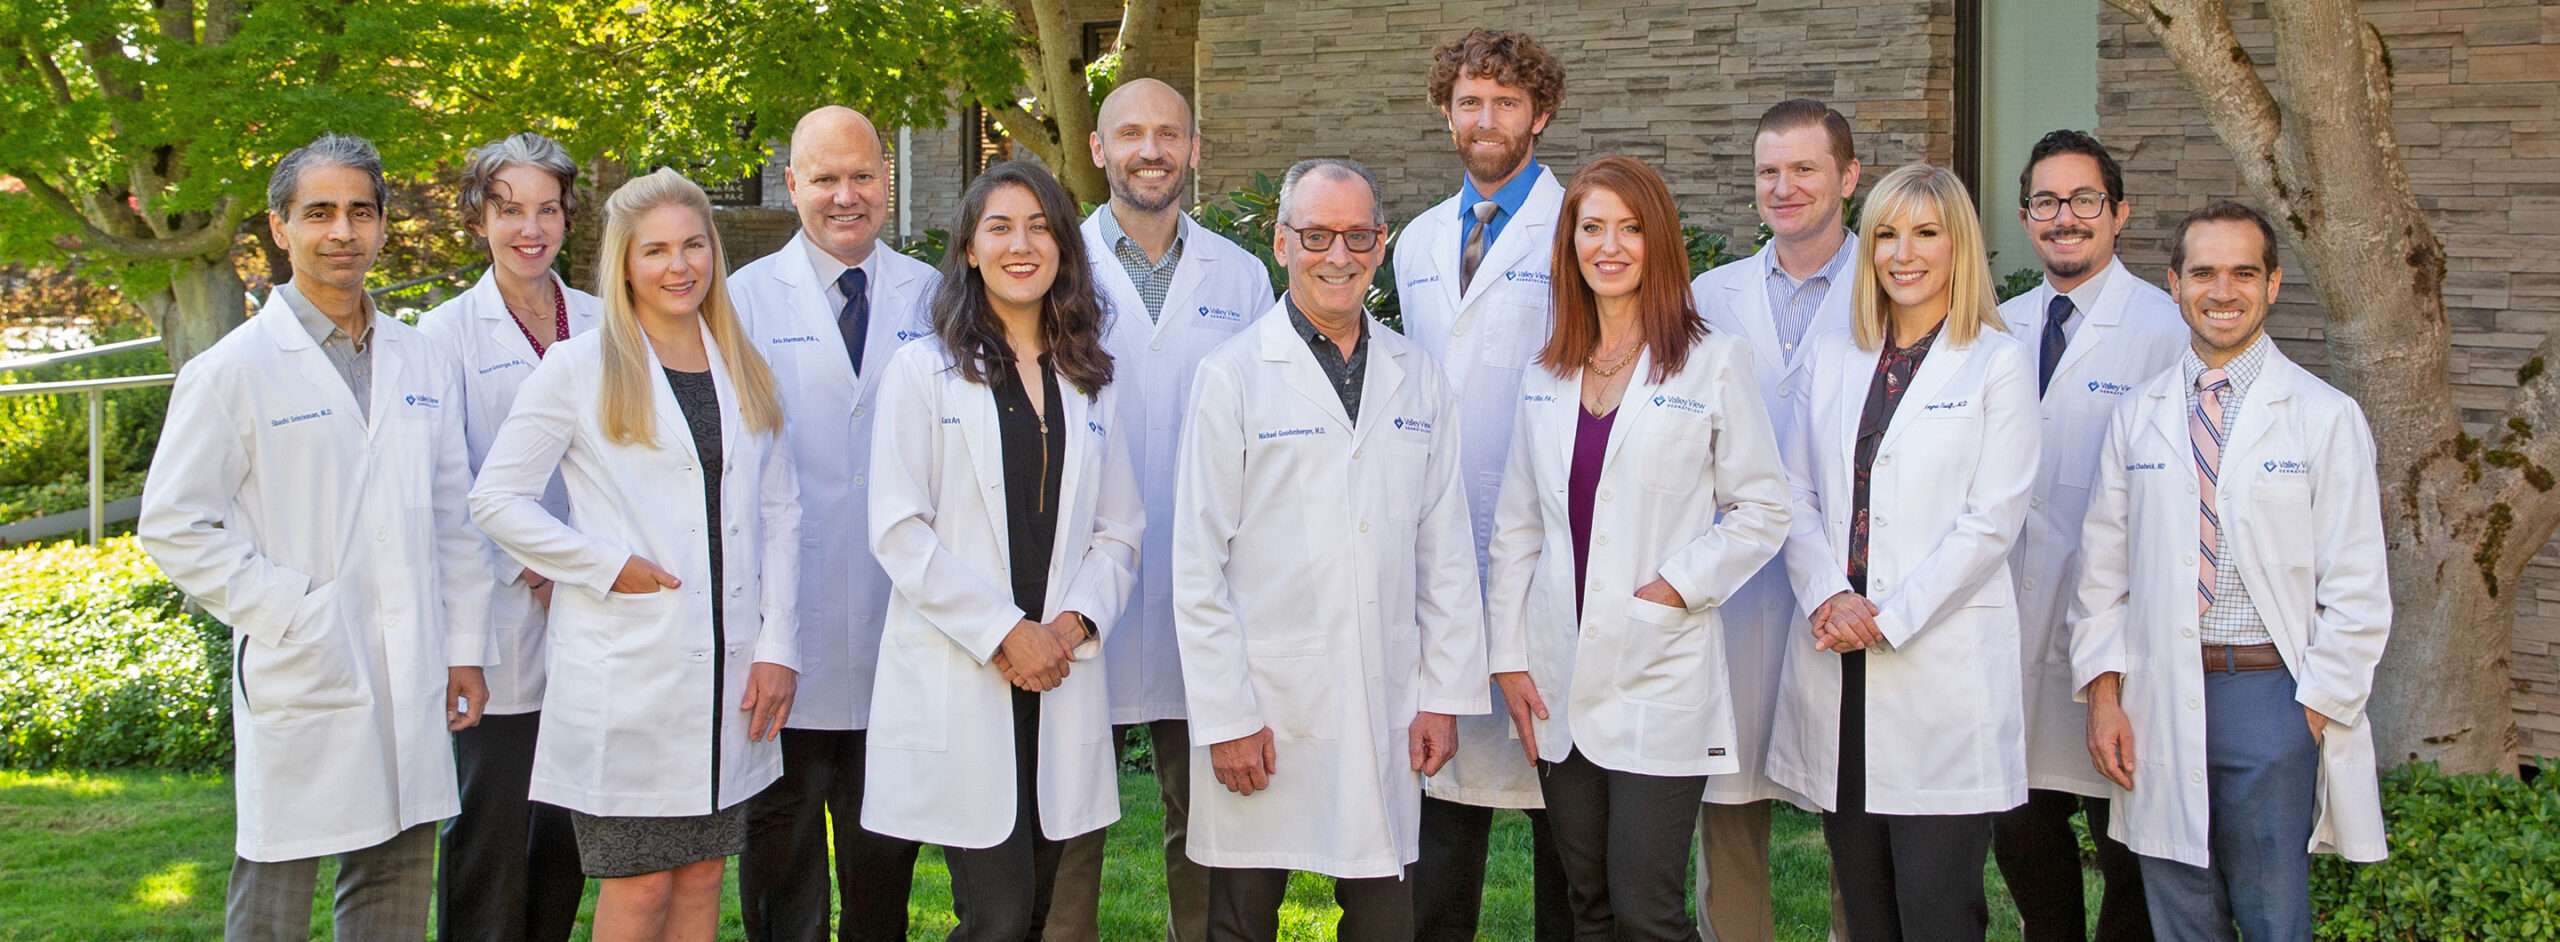 The Valley View Dermatology team in a group photo outside their Salem location.